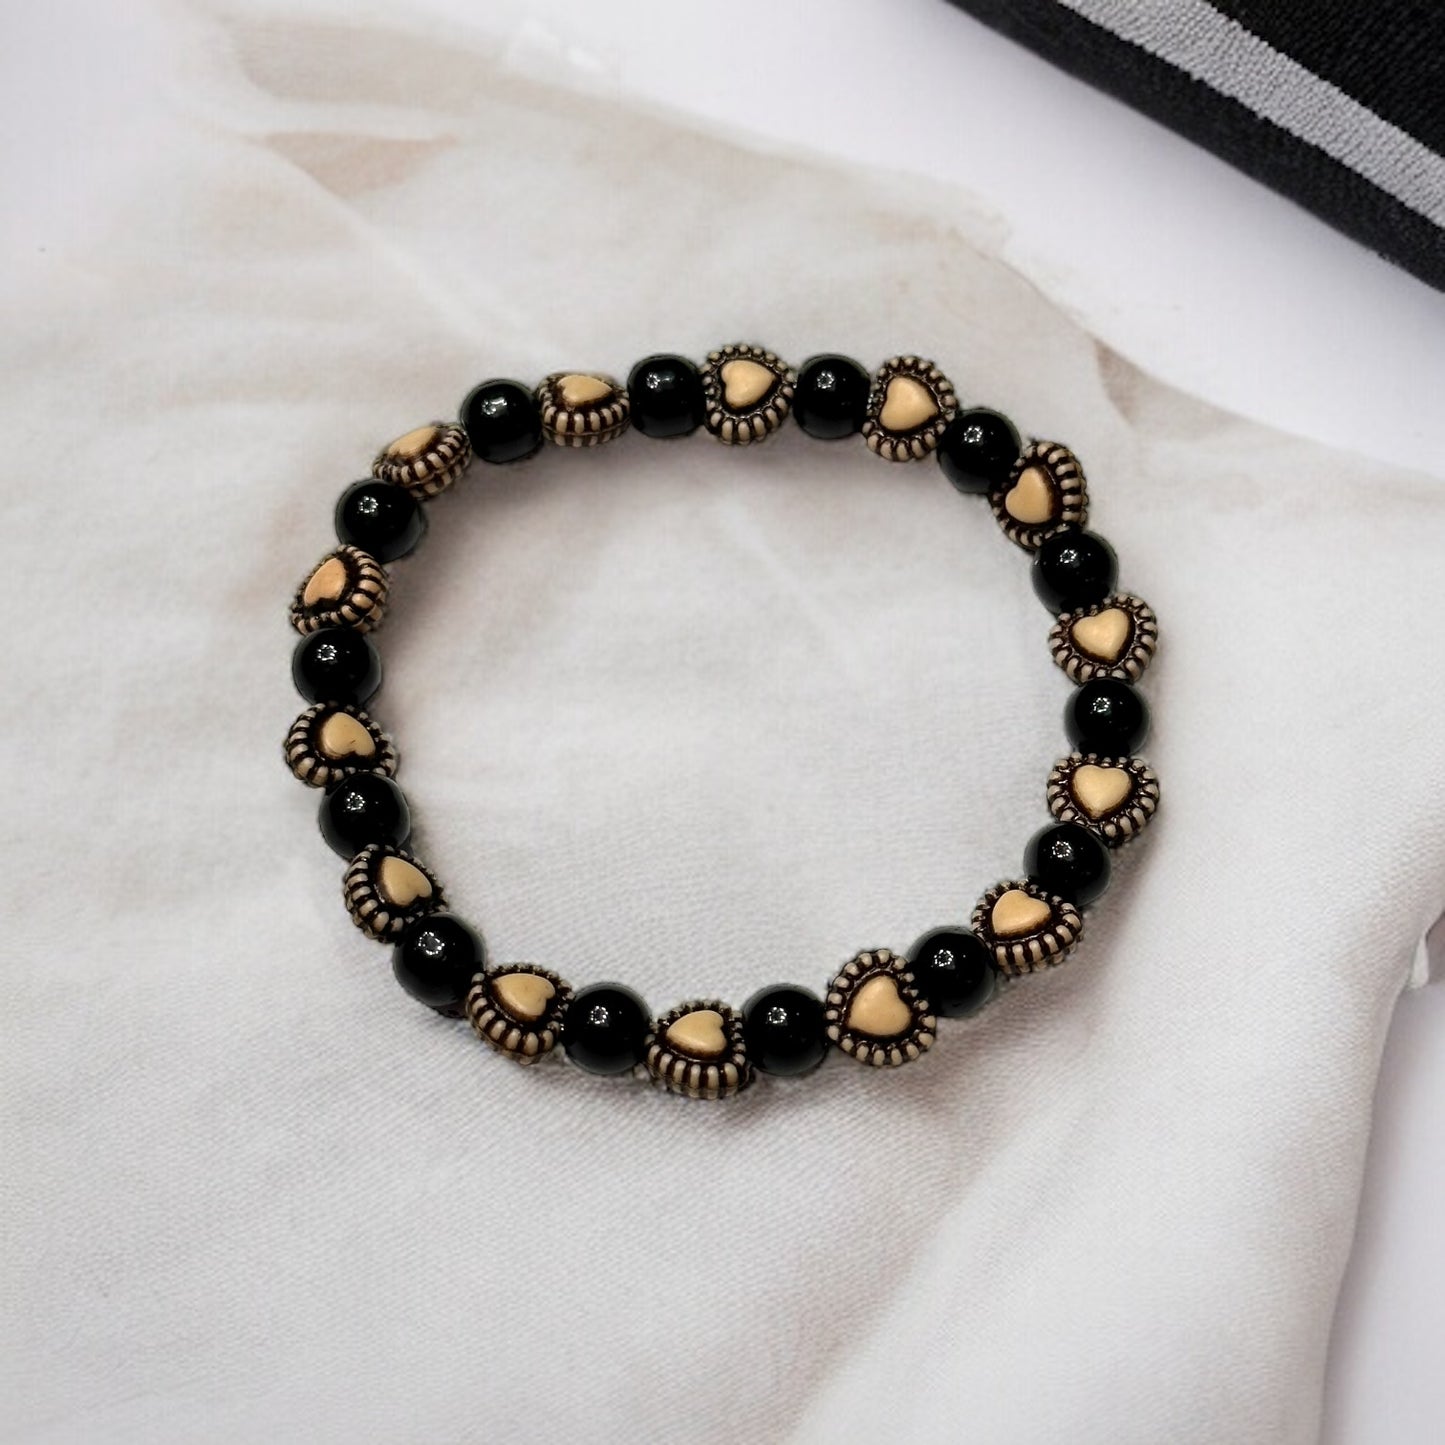 Black & Gold Beaded Stretch Bracelet with Heart Accent Beads